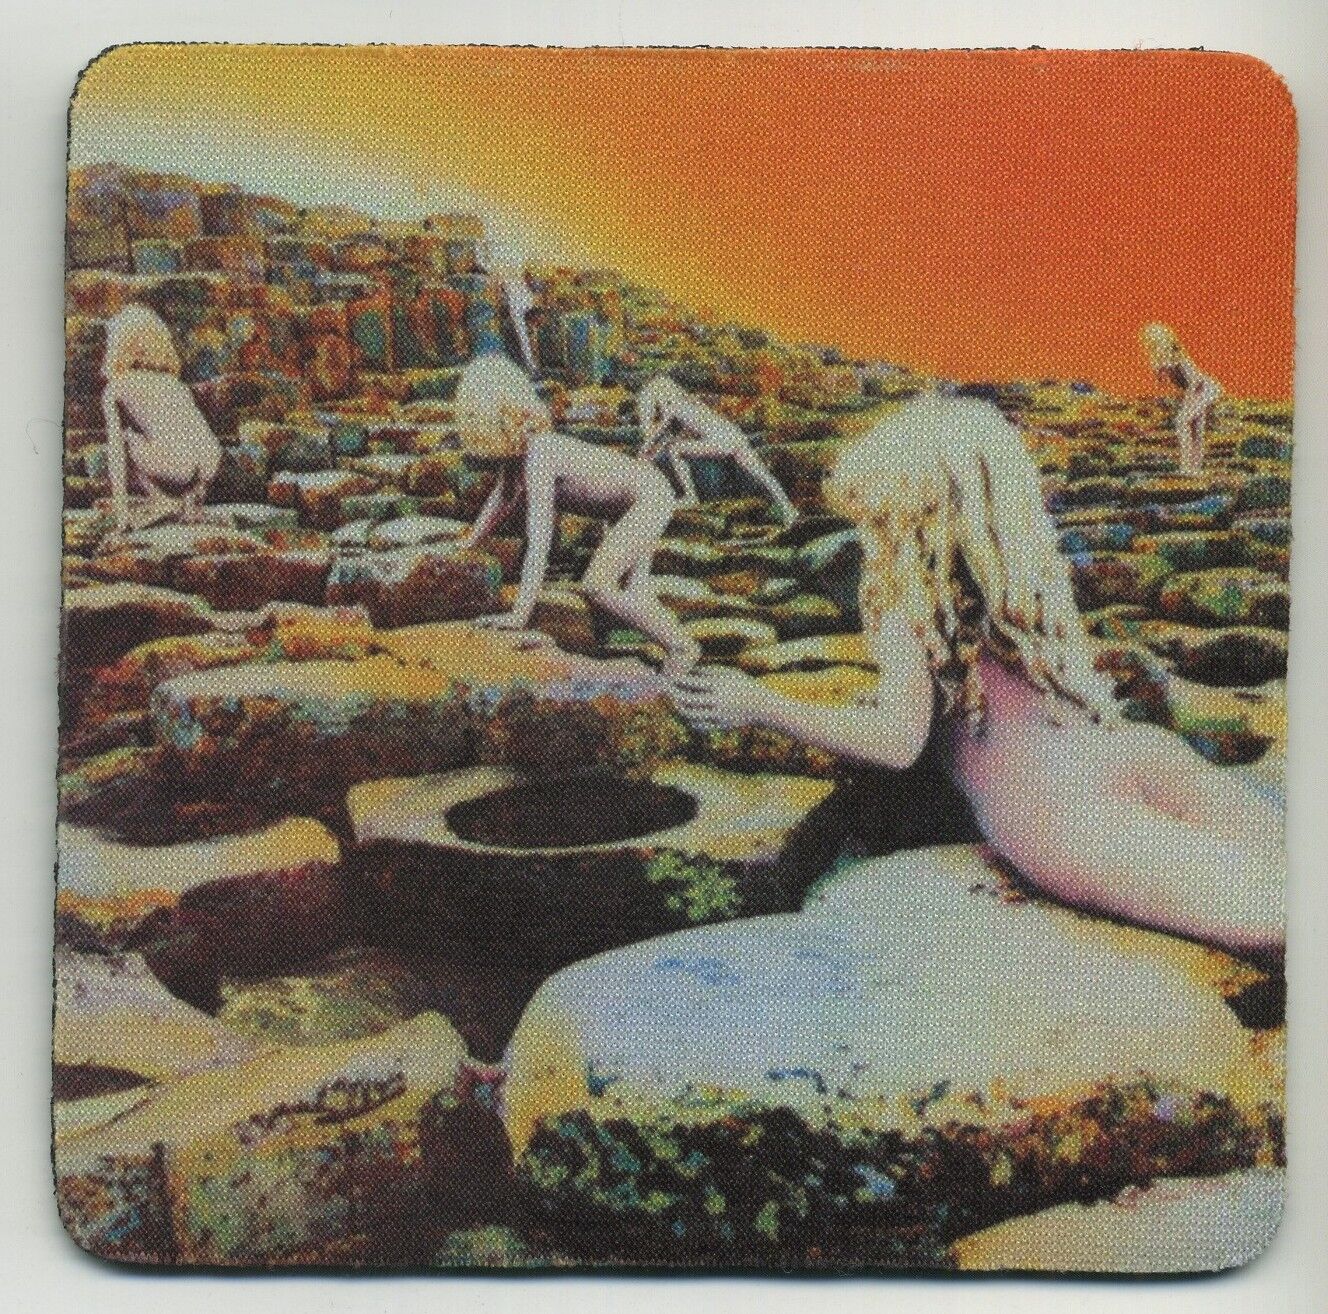 Led Zeppelin Record Album cover COASTER -  Houses of the Holy